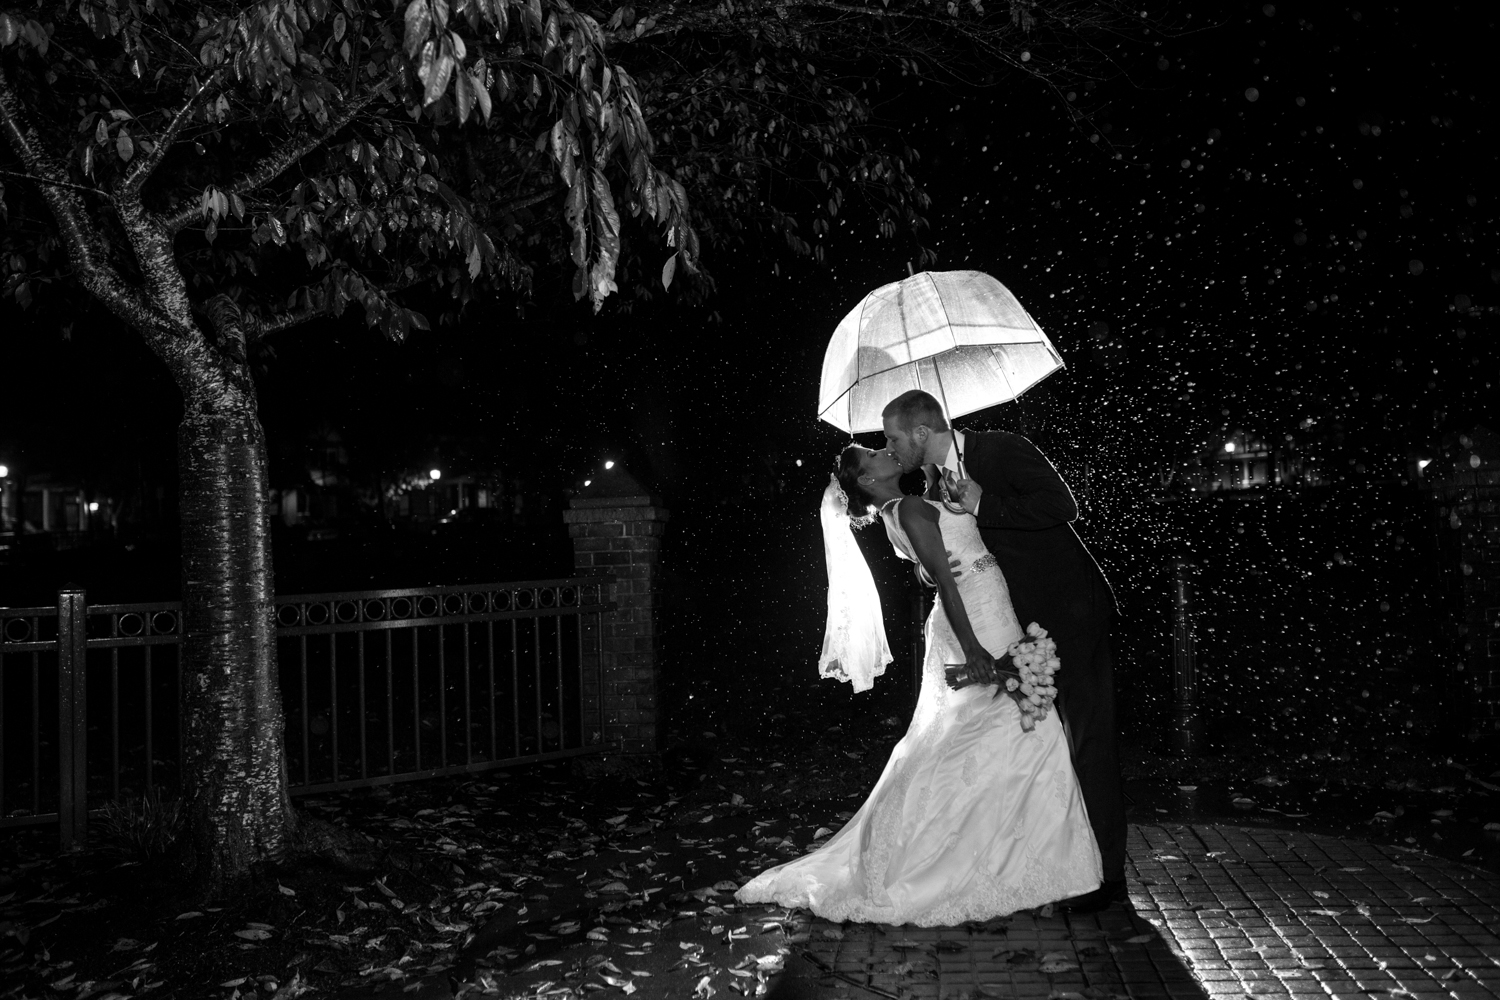 How to deal with rain on your wedding day: rainy night shot of bride and groom with umbrella.